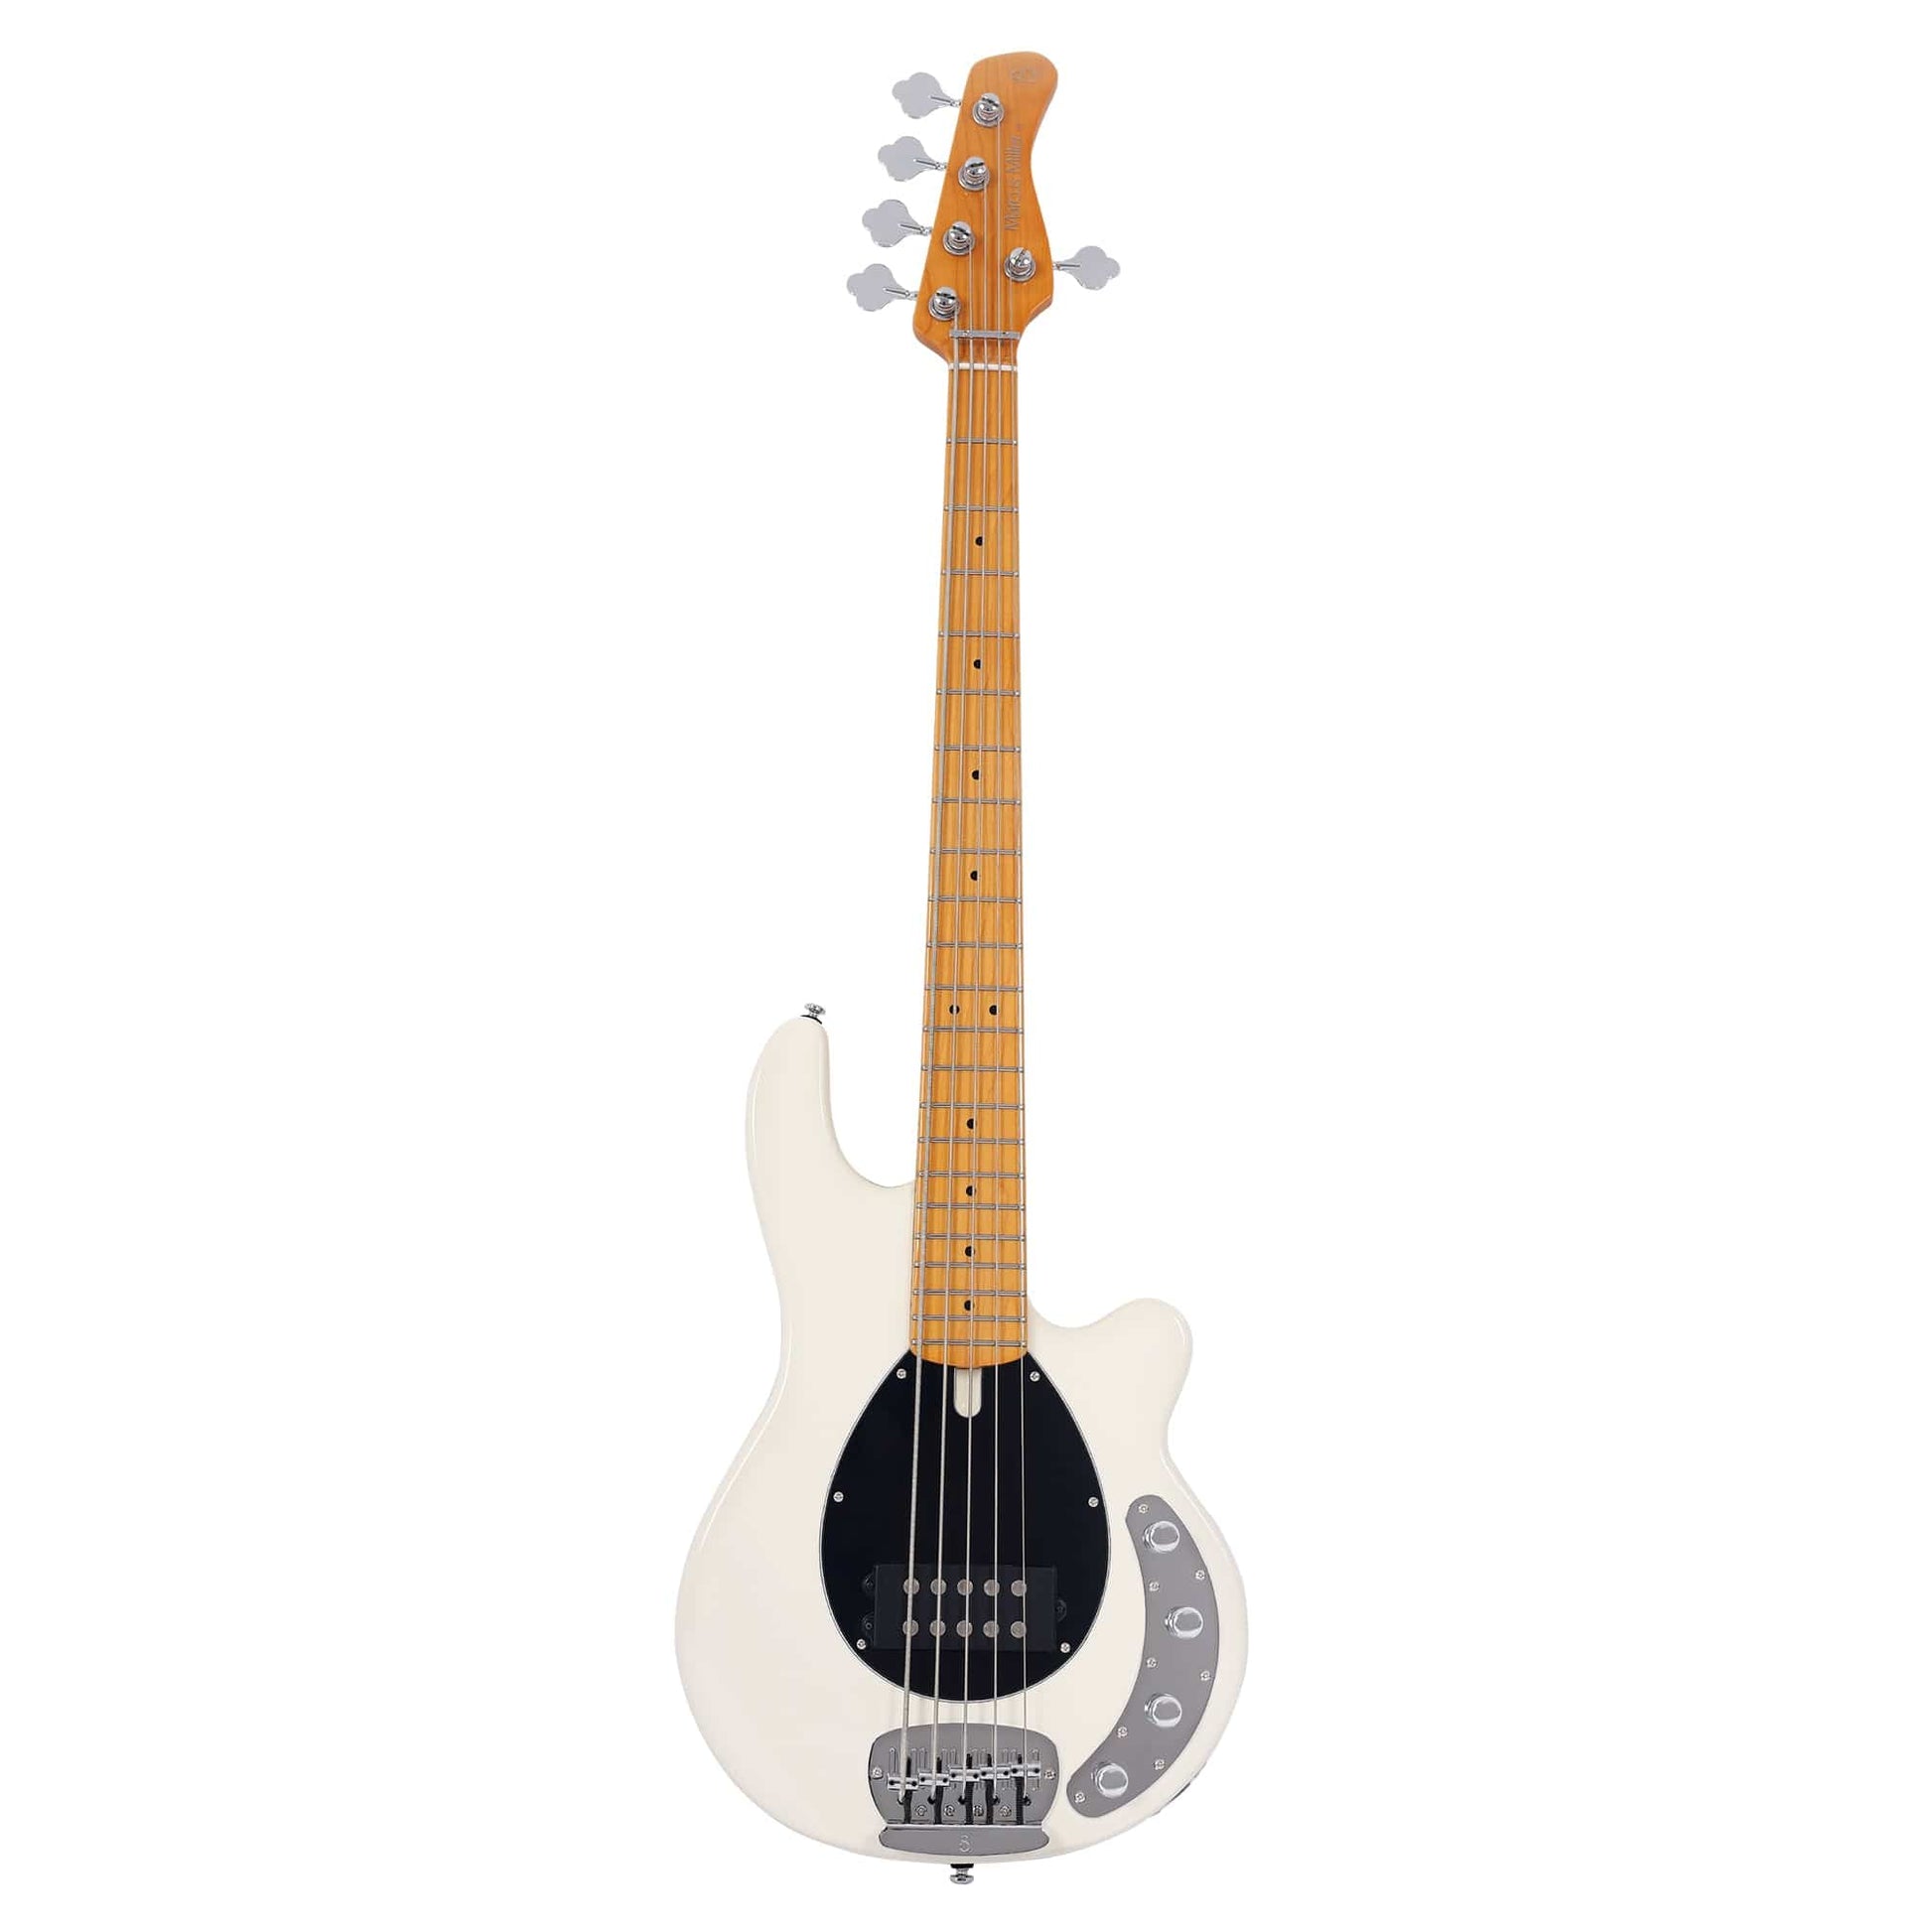 Sire Marcus Miller Z3 5-String Antique White Bass Guitars / 5-String or More